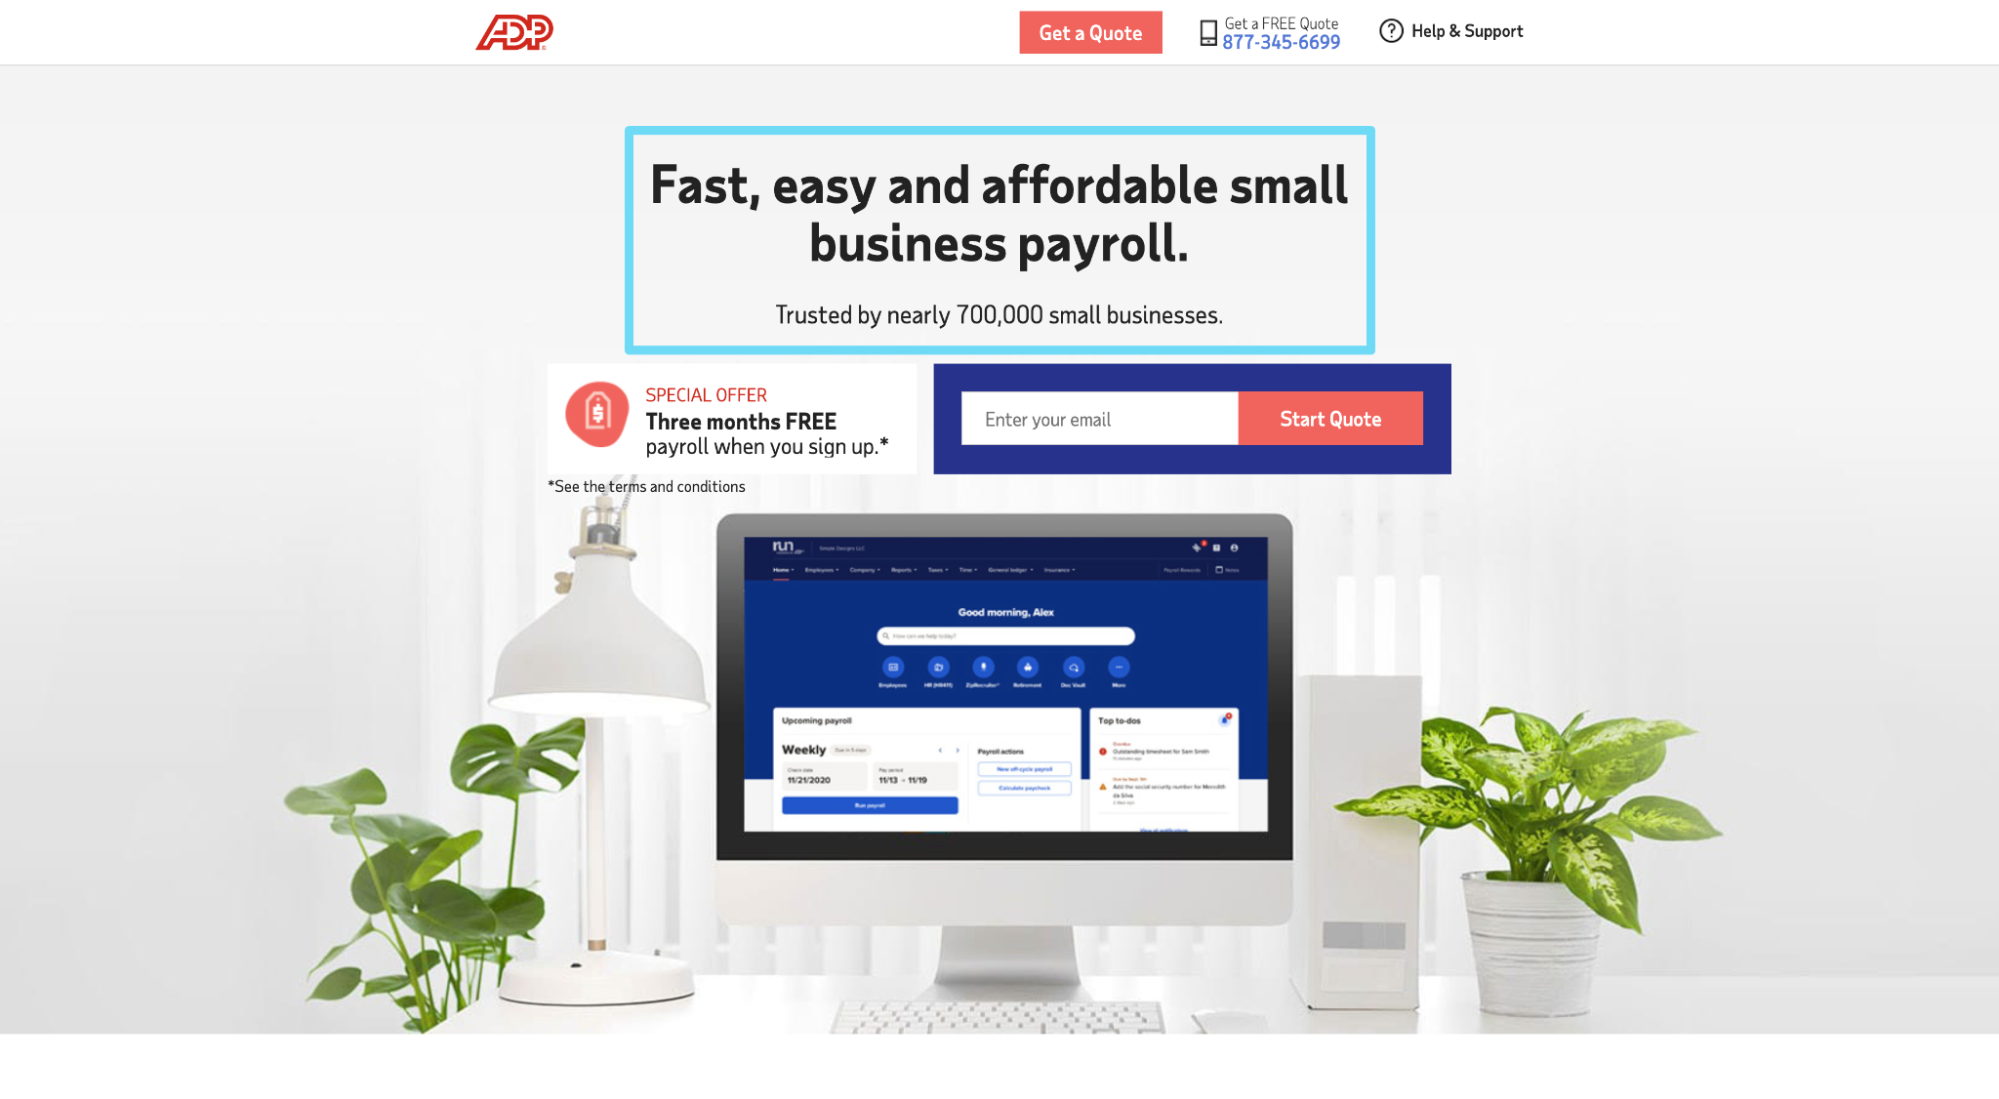 ADP page matches the landing